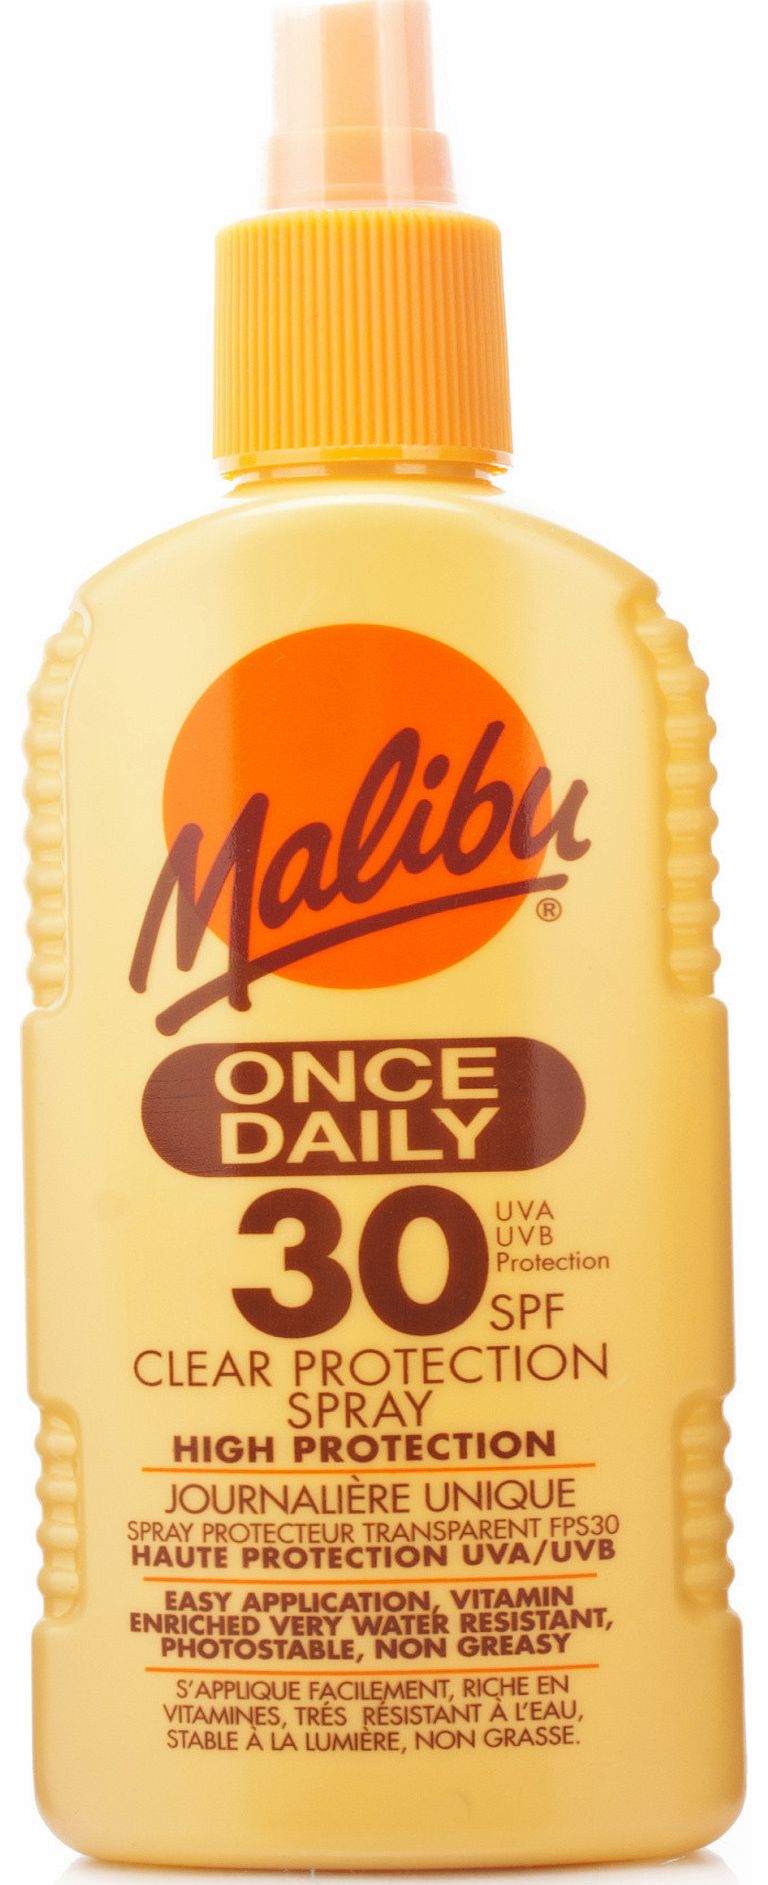 Once Daily Clear Protection Lotion SPF30